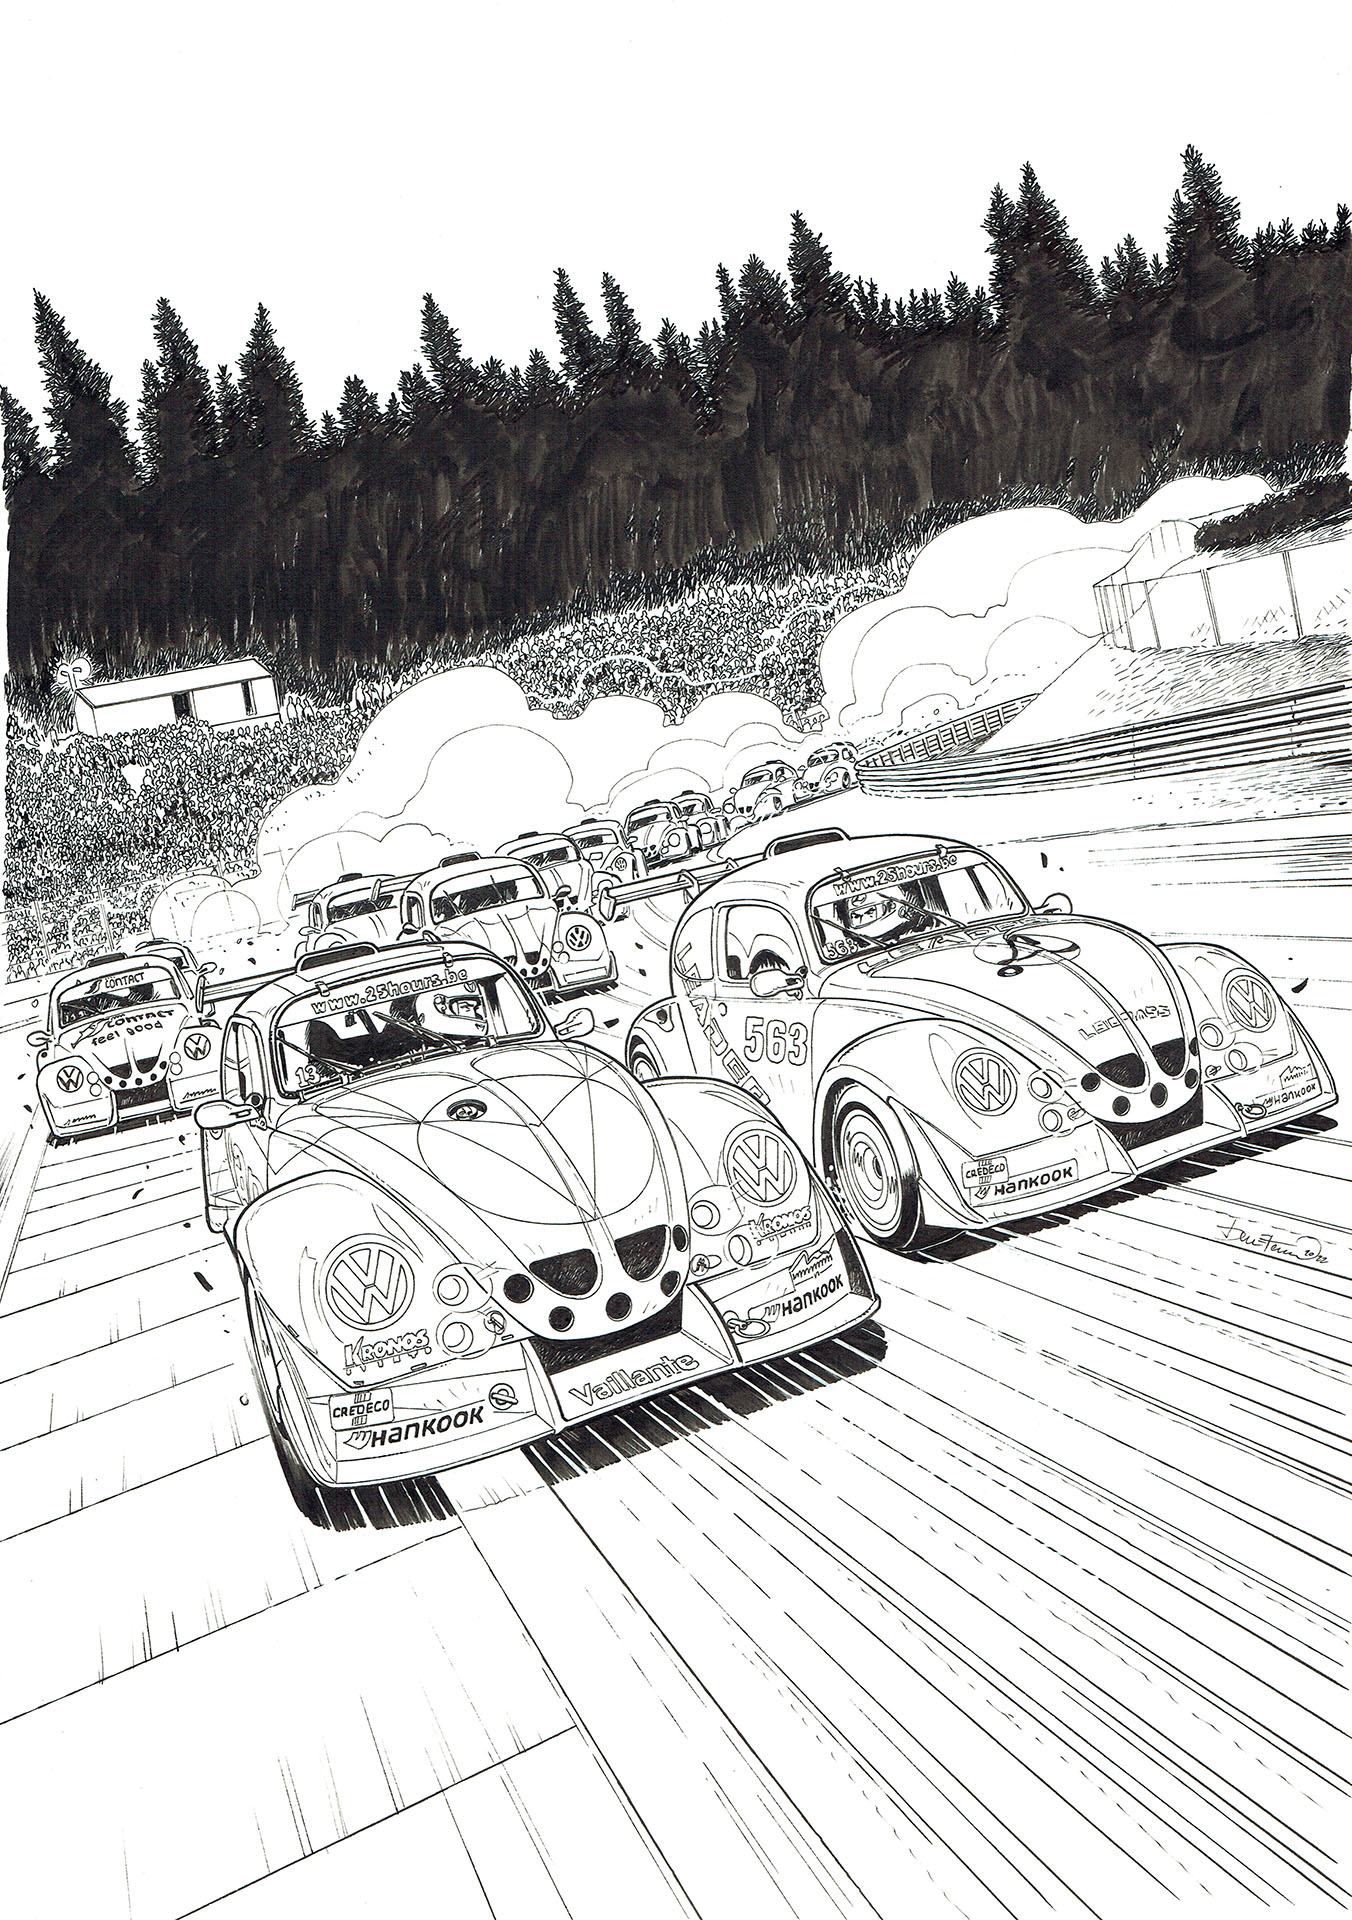 Benjamin BENETEAU | 25 Hours VW Fun Cup Spa — July 2022 Poster — Page 